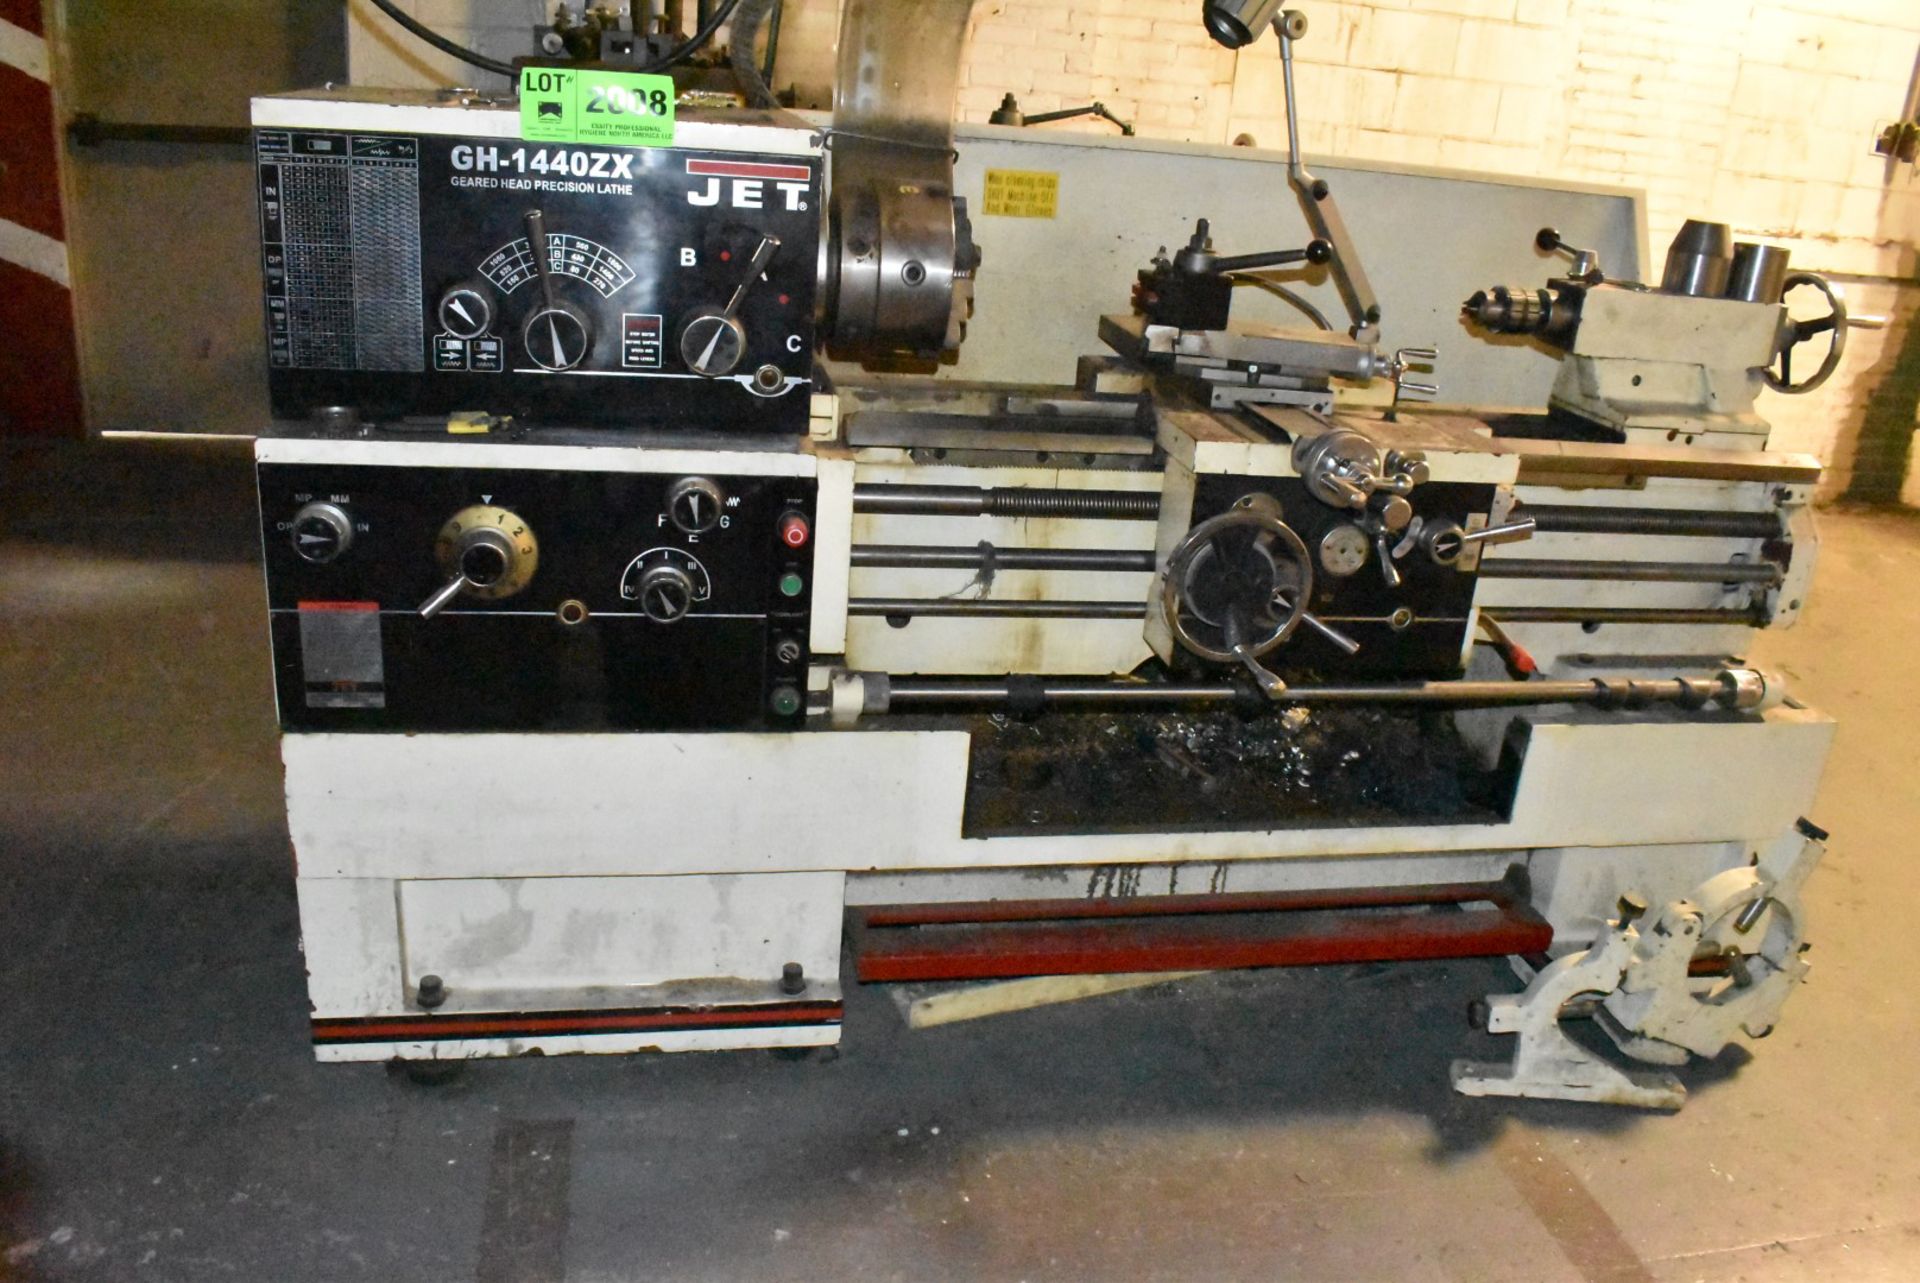 JET (2010) GH-1440ZX GAP BED ENGINE LATHE WITH 14" SWING OVER BED, 23" SWING IN THE GAP, 40" BETWEEN - Image 3 of 16